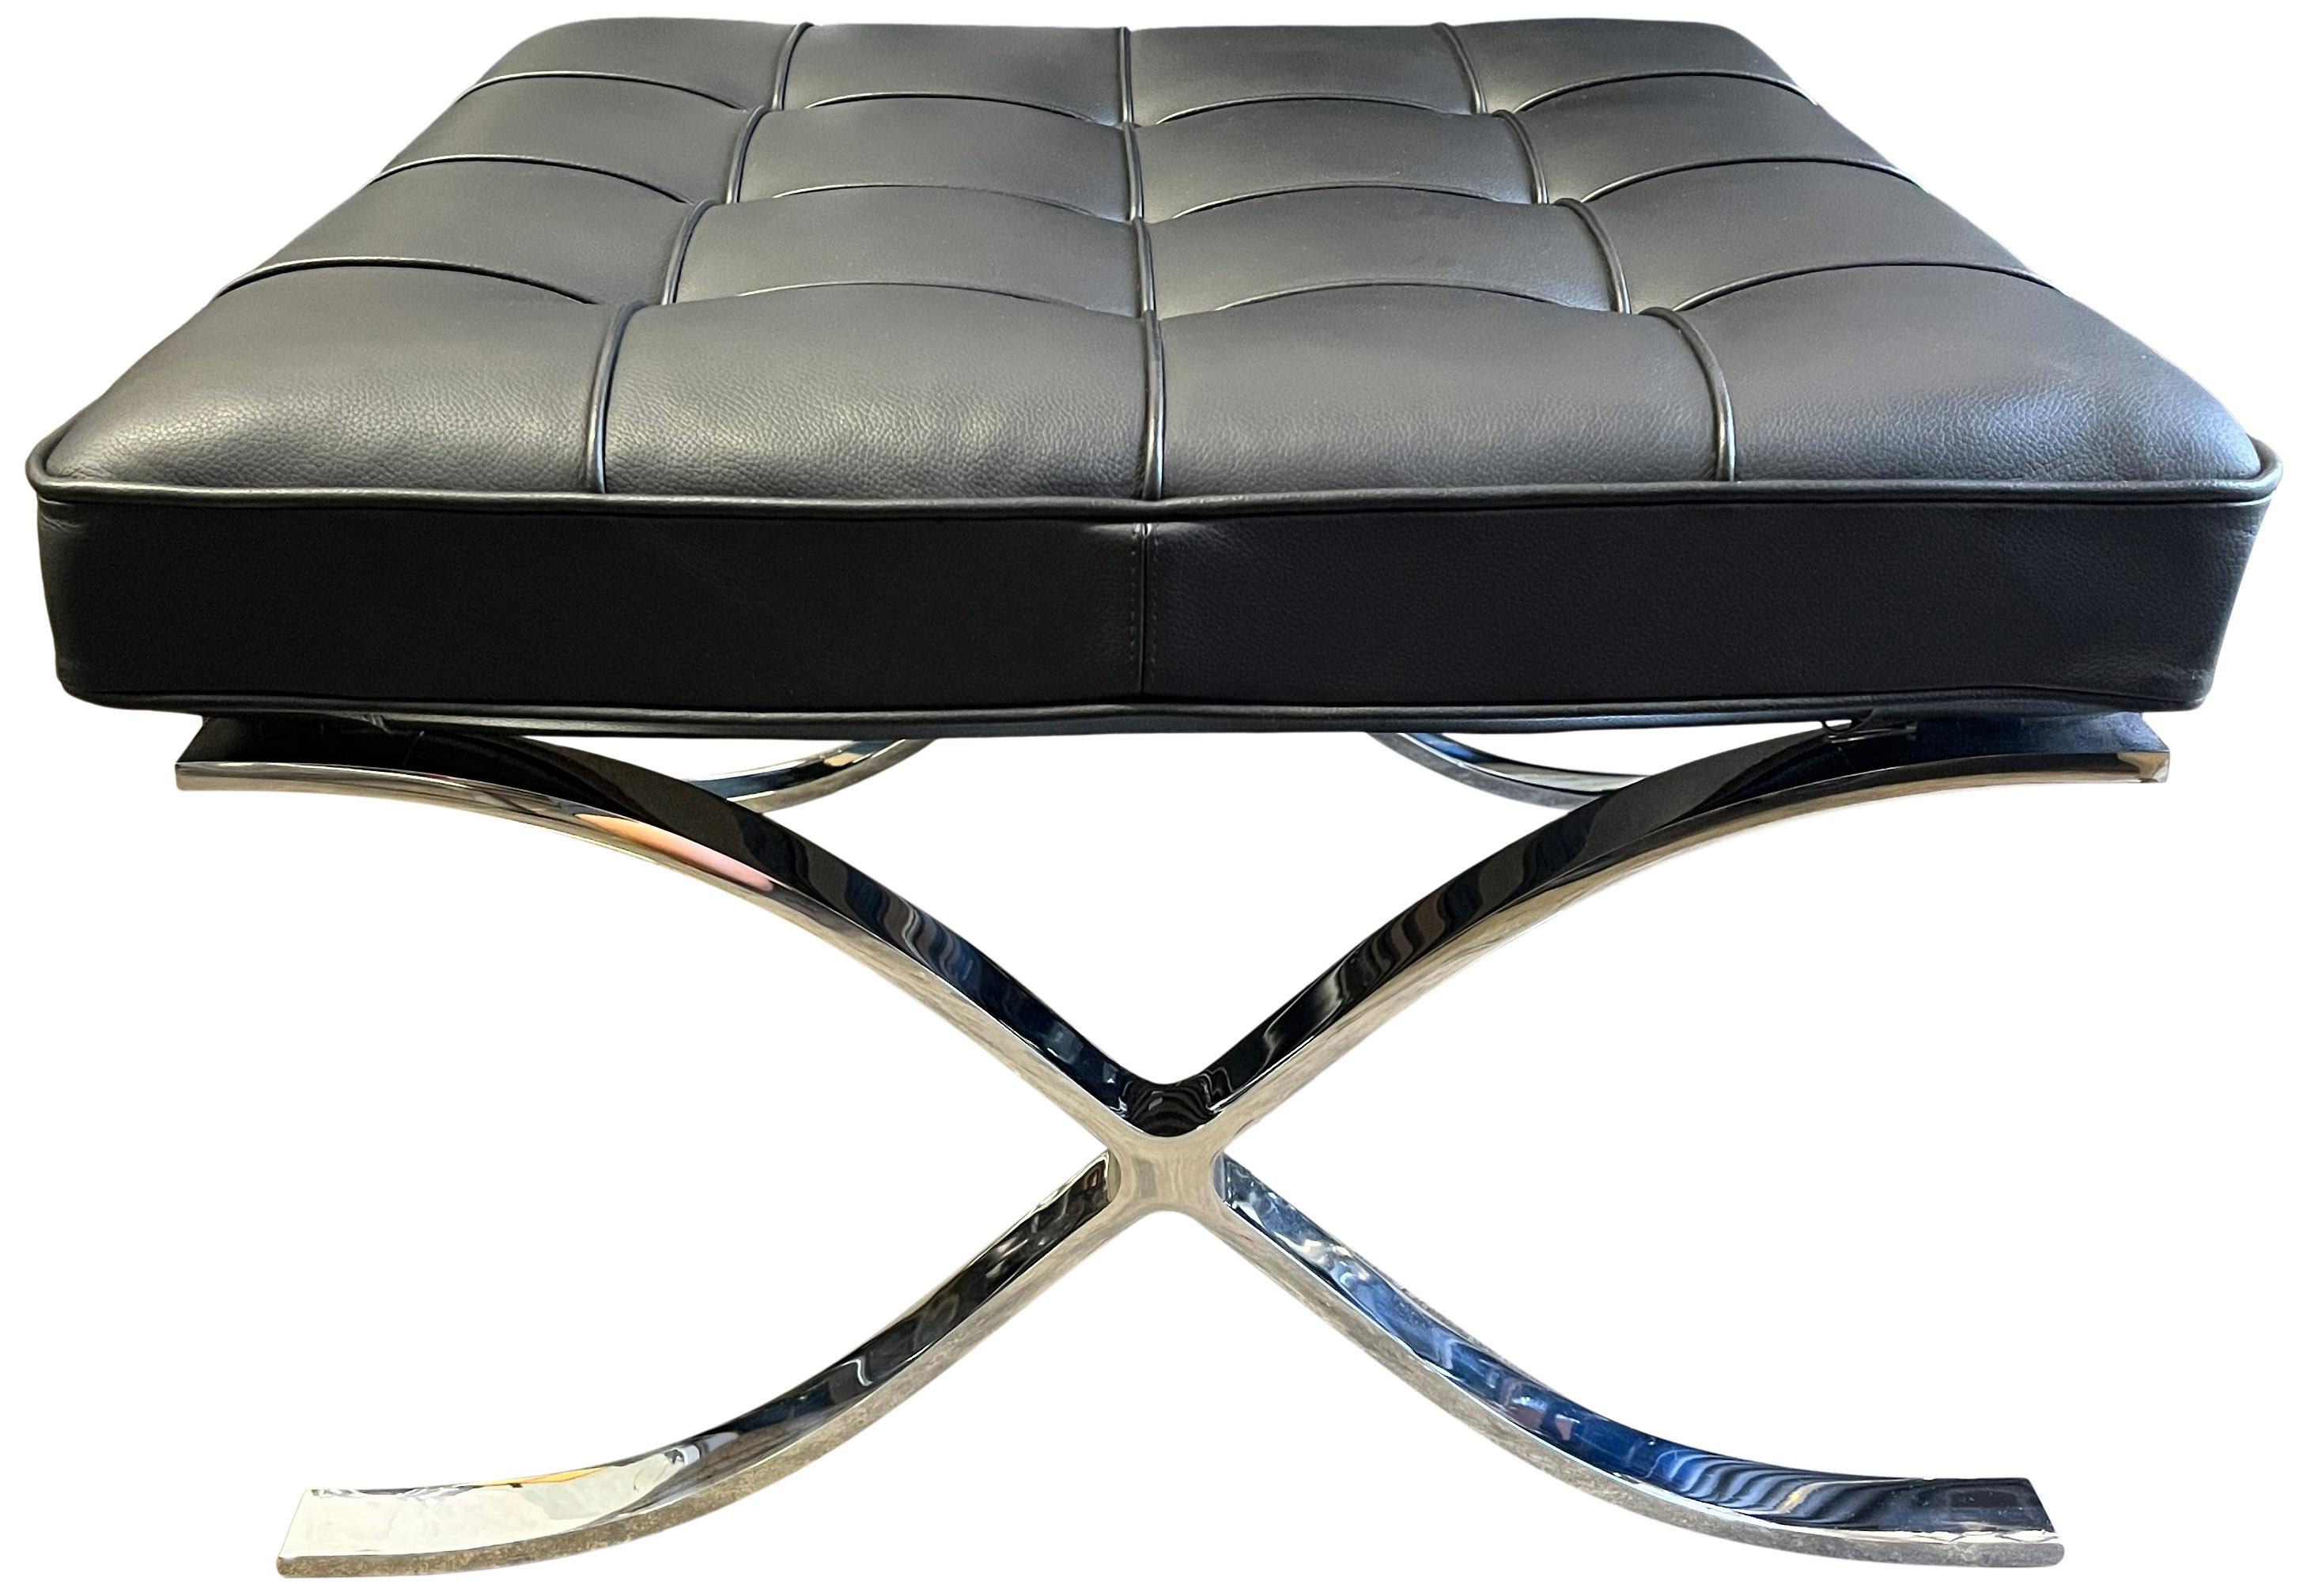 Midcentury Barcelona Ottomans / Stools in Black Leather for Knoll
 For Sale